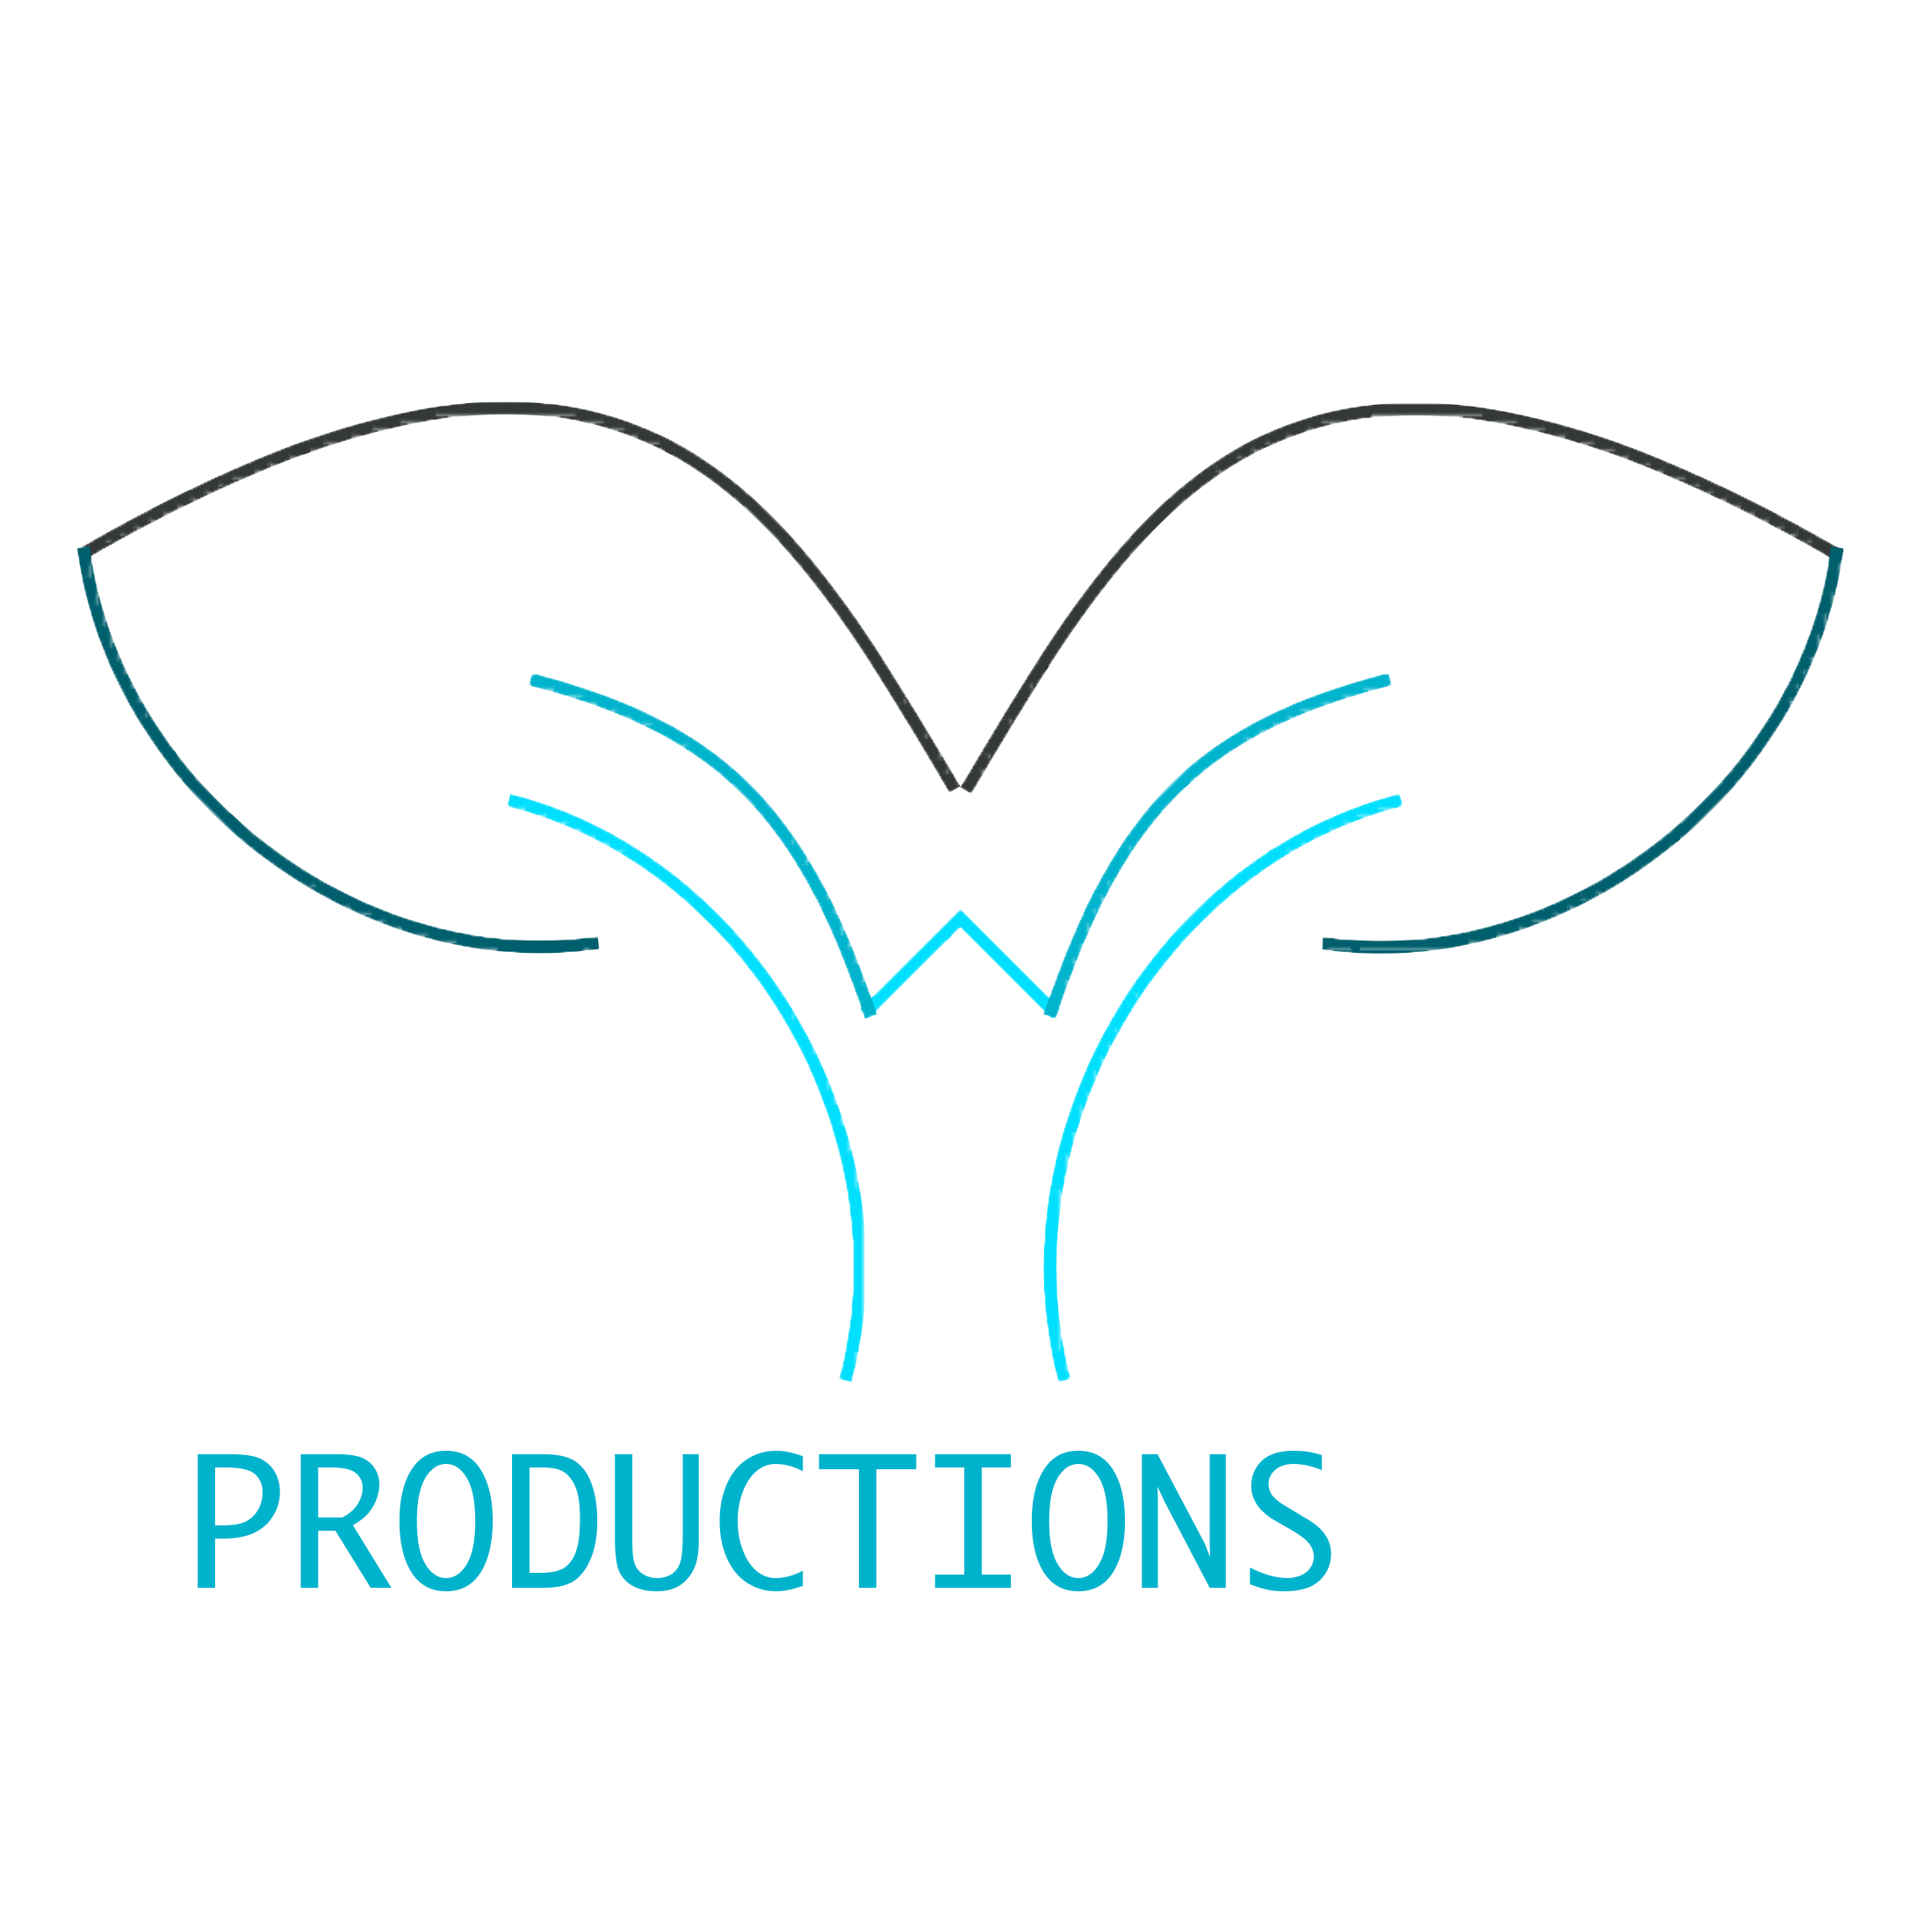 WHITE WHALE PRODUCTIONS